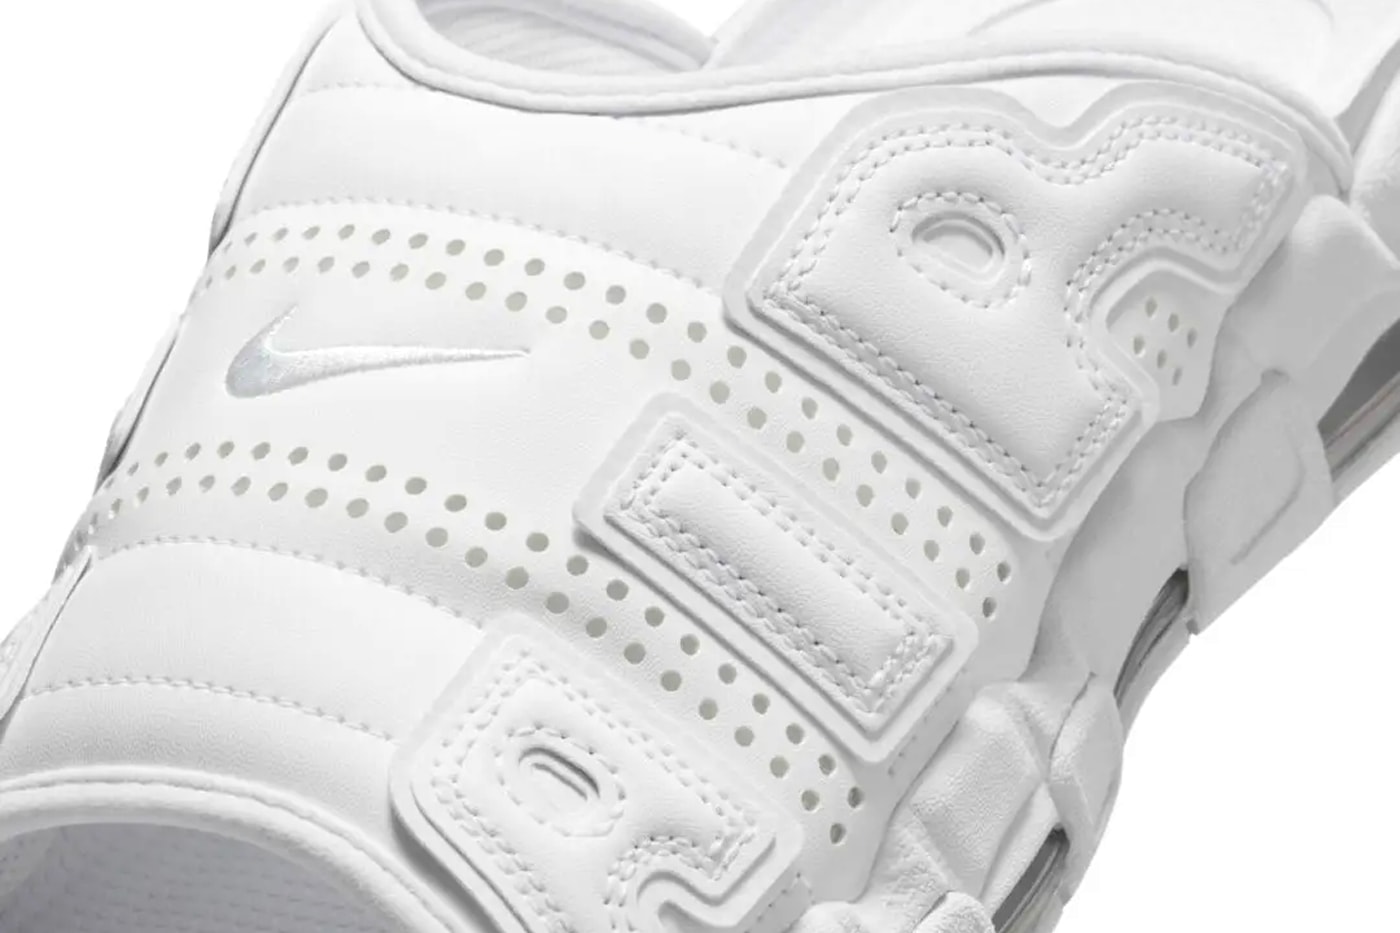 Official Look a the Nike Air More Uptempo Slide "Triple White" FD9883-101 sandals pool beach flip flop alternatives retro basketball